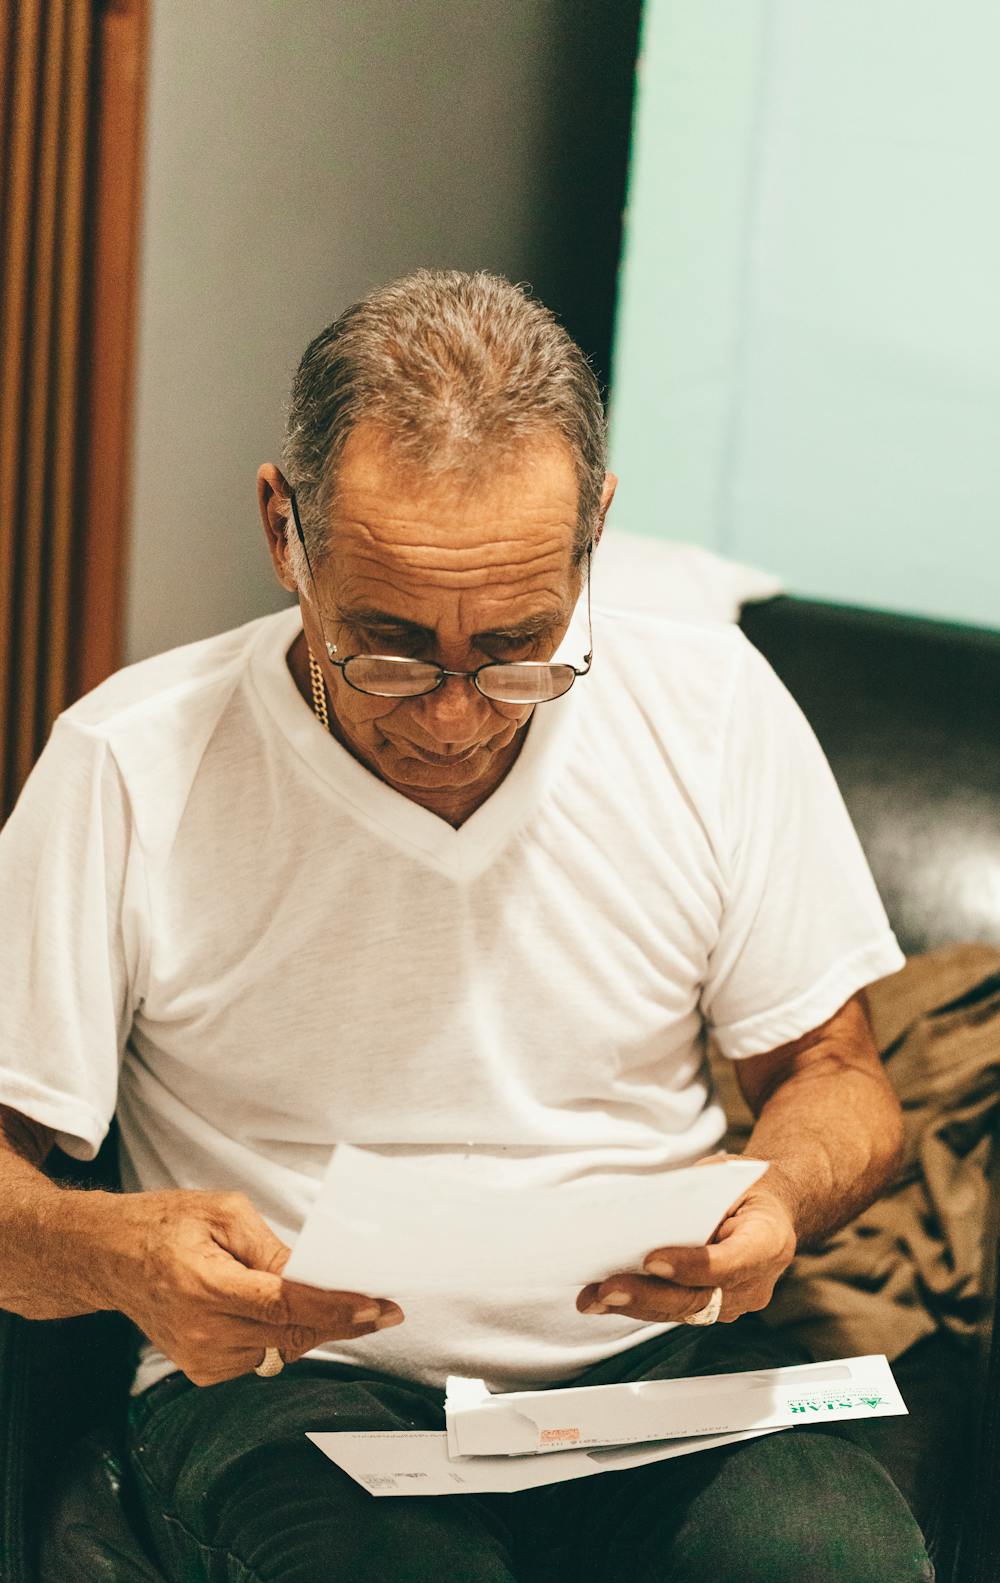 An image showing an old man focused on reading a paper. | Photo: Pexels